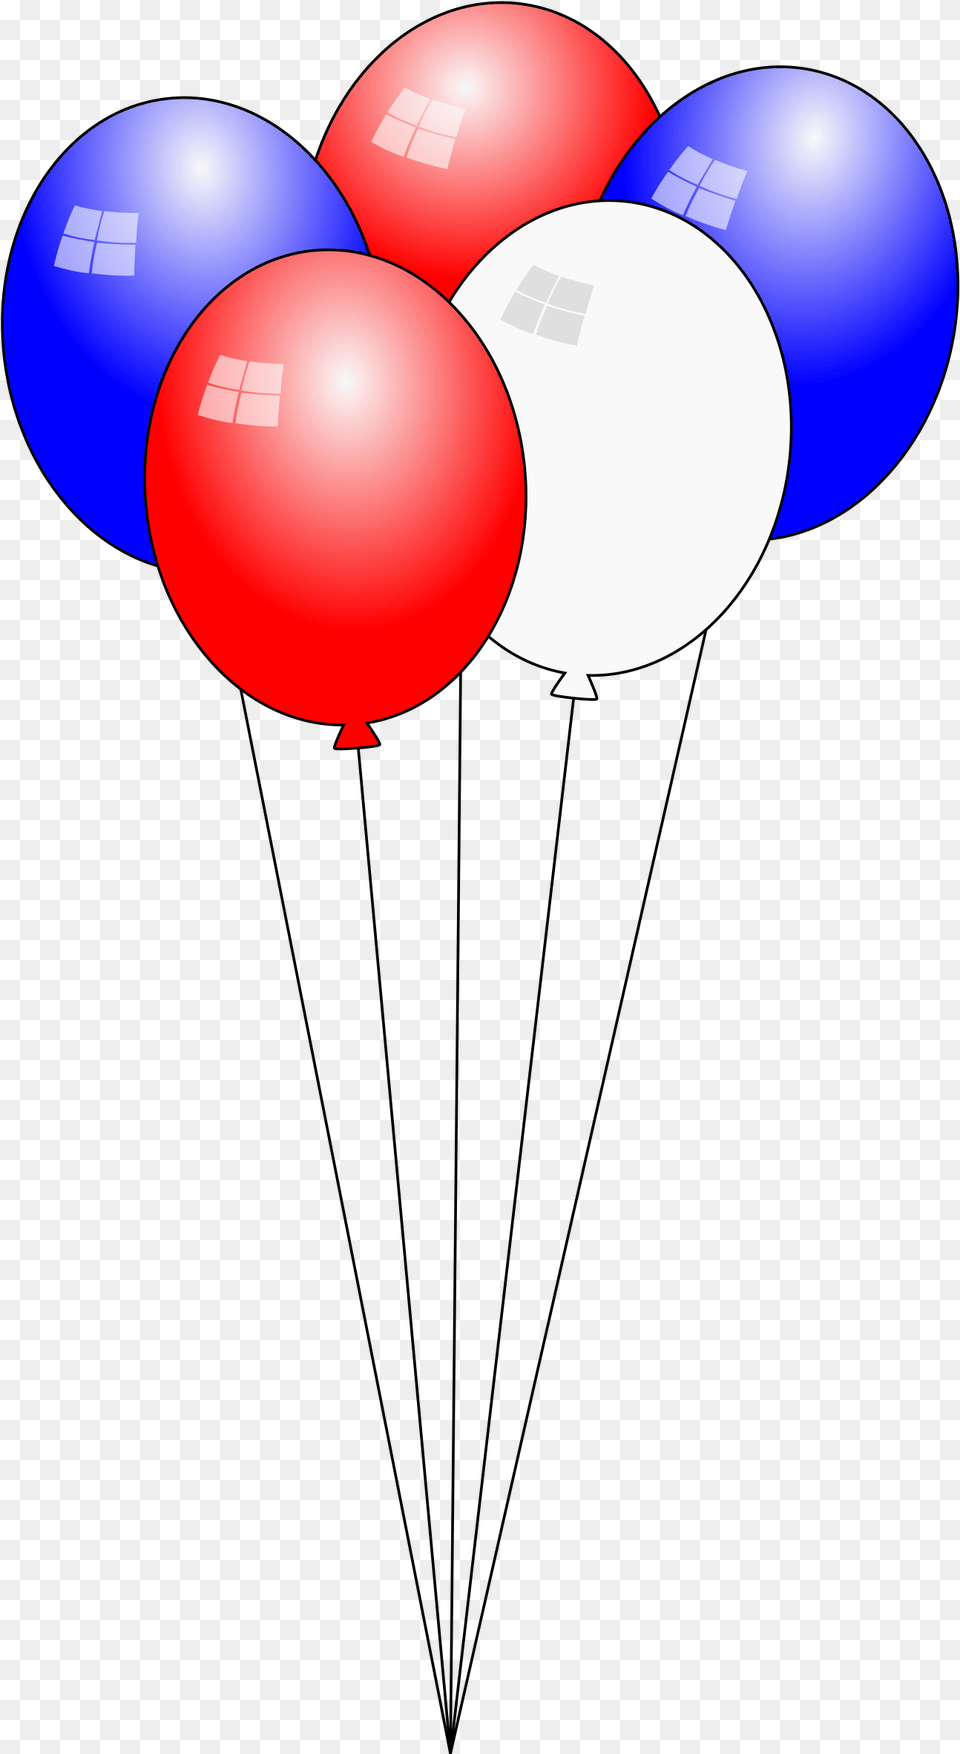 Swaying 4th Of July Balloons Animation Clip Arts Red White And Blue Balloons Clip Art, Balloon, Sphere Free Transparent Png